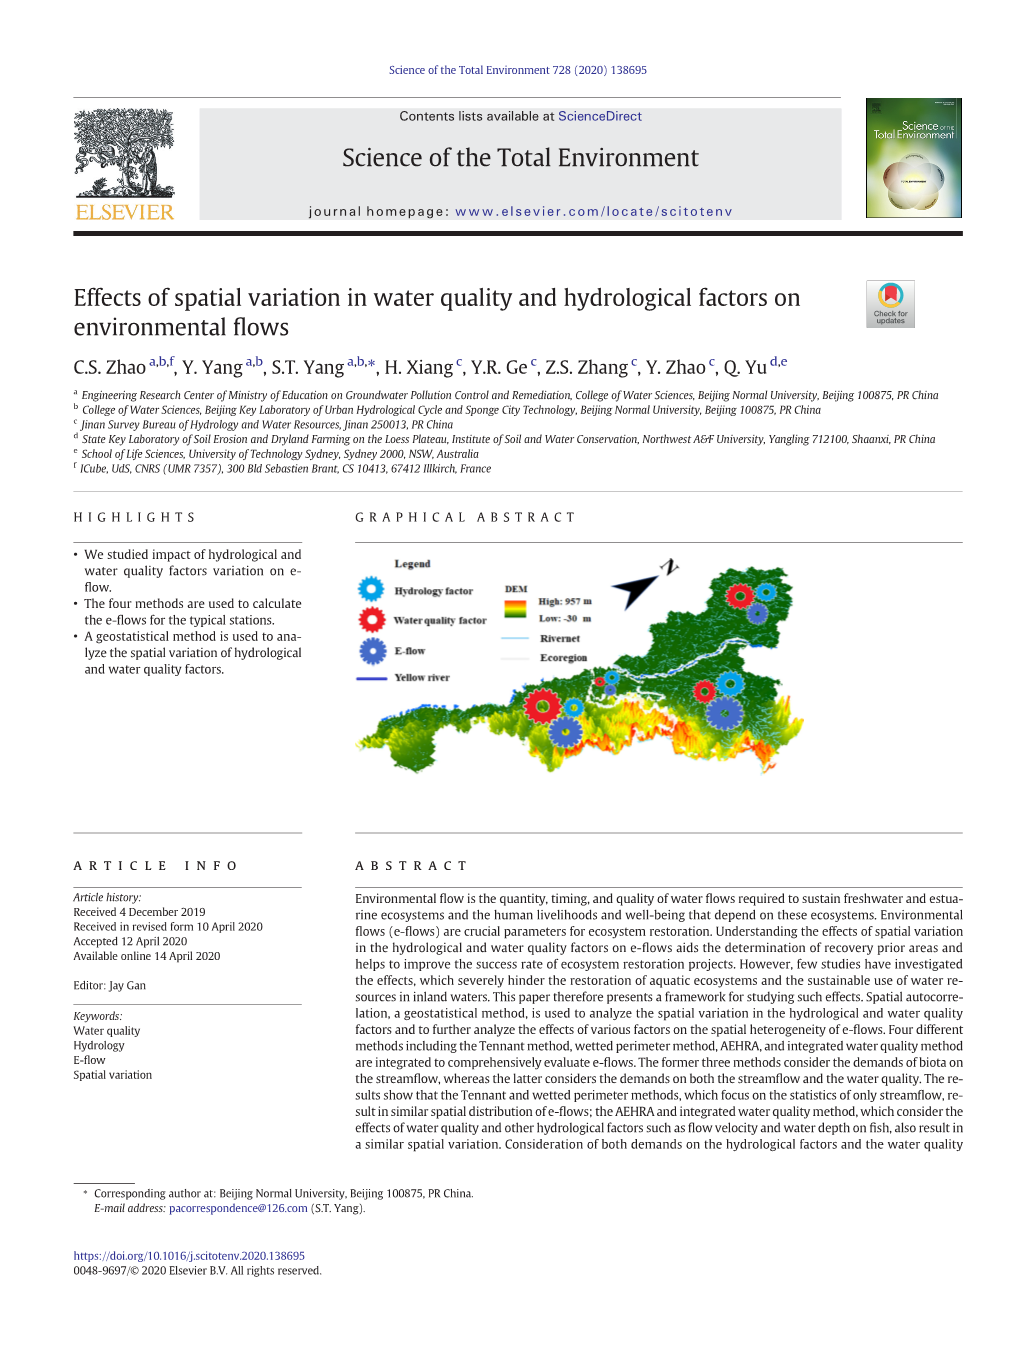 Effects of Spatial Variation in Water Quality and Hydrological Factors on Environmental Flows